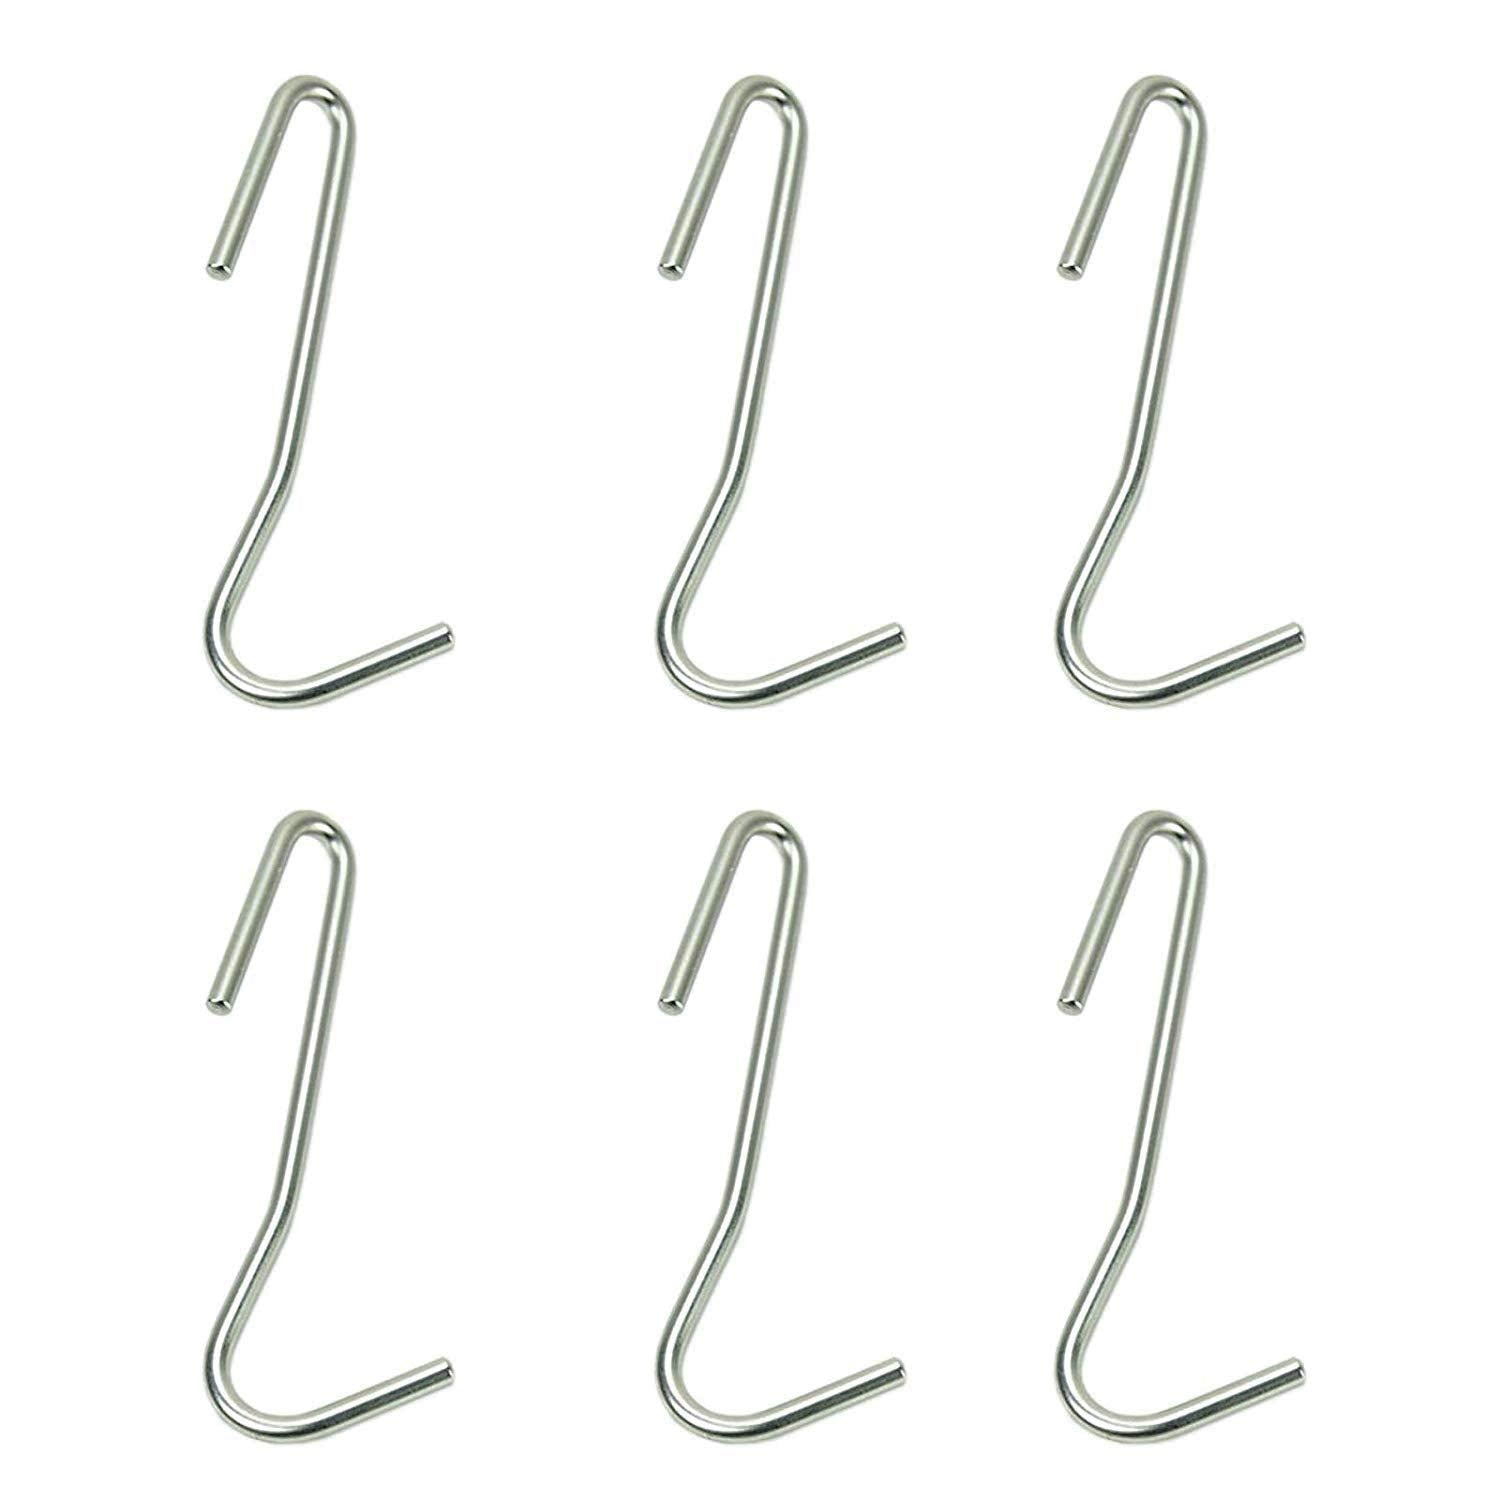 HUJI Stainless Steel Universal S-Shape Hanging Hooks for Cookware Pots Pans (Set of 6)